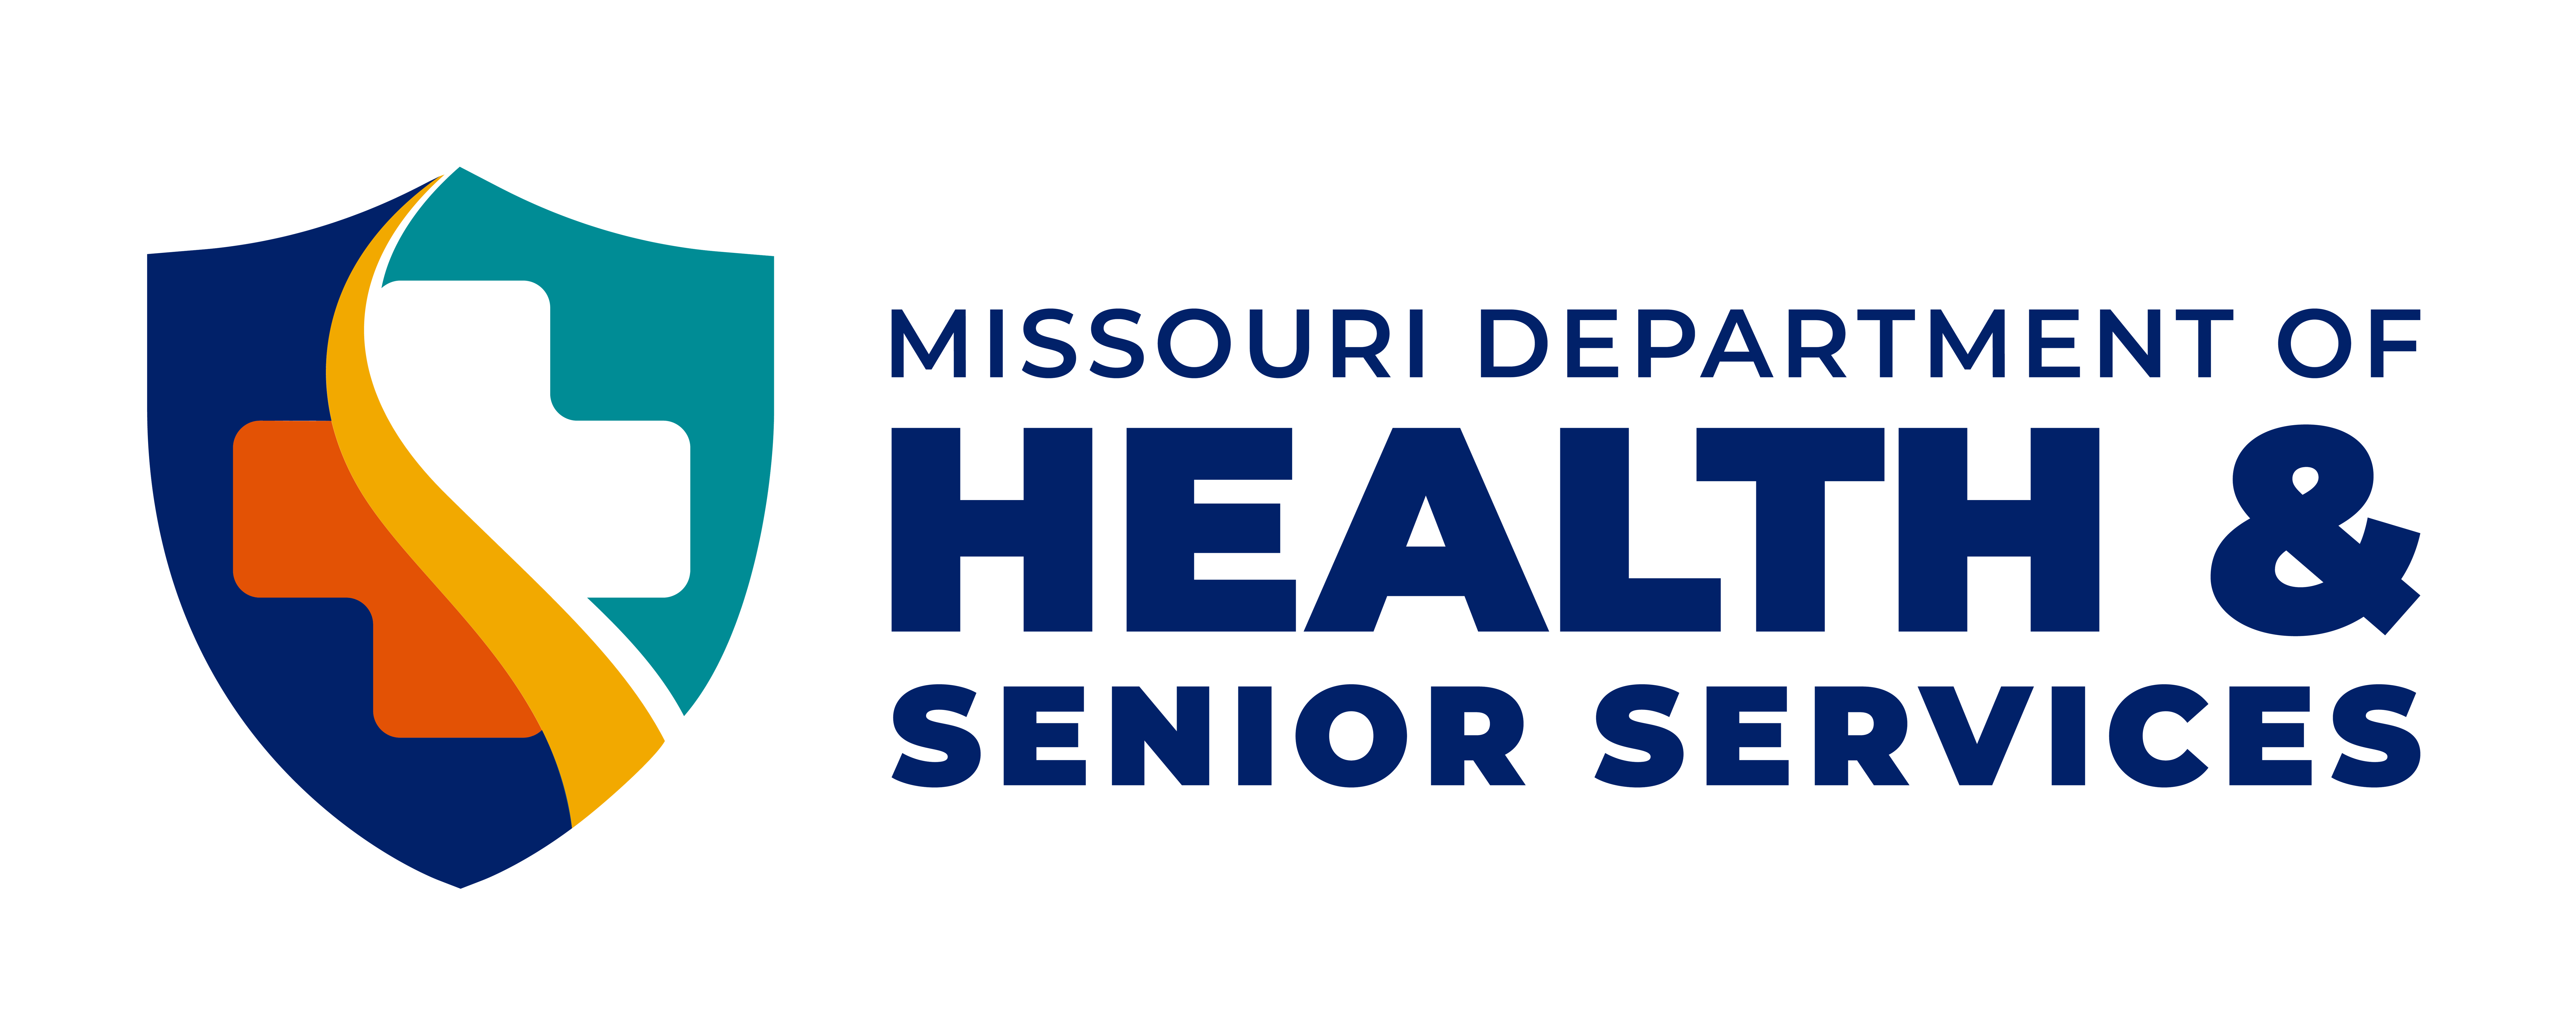 Missouri department of health and senior services (DHSS) logo